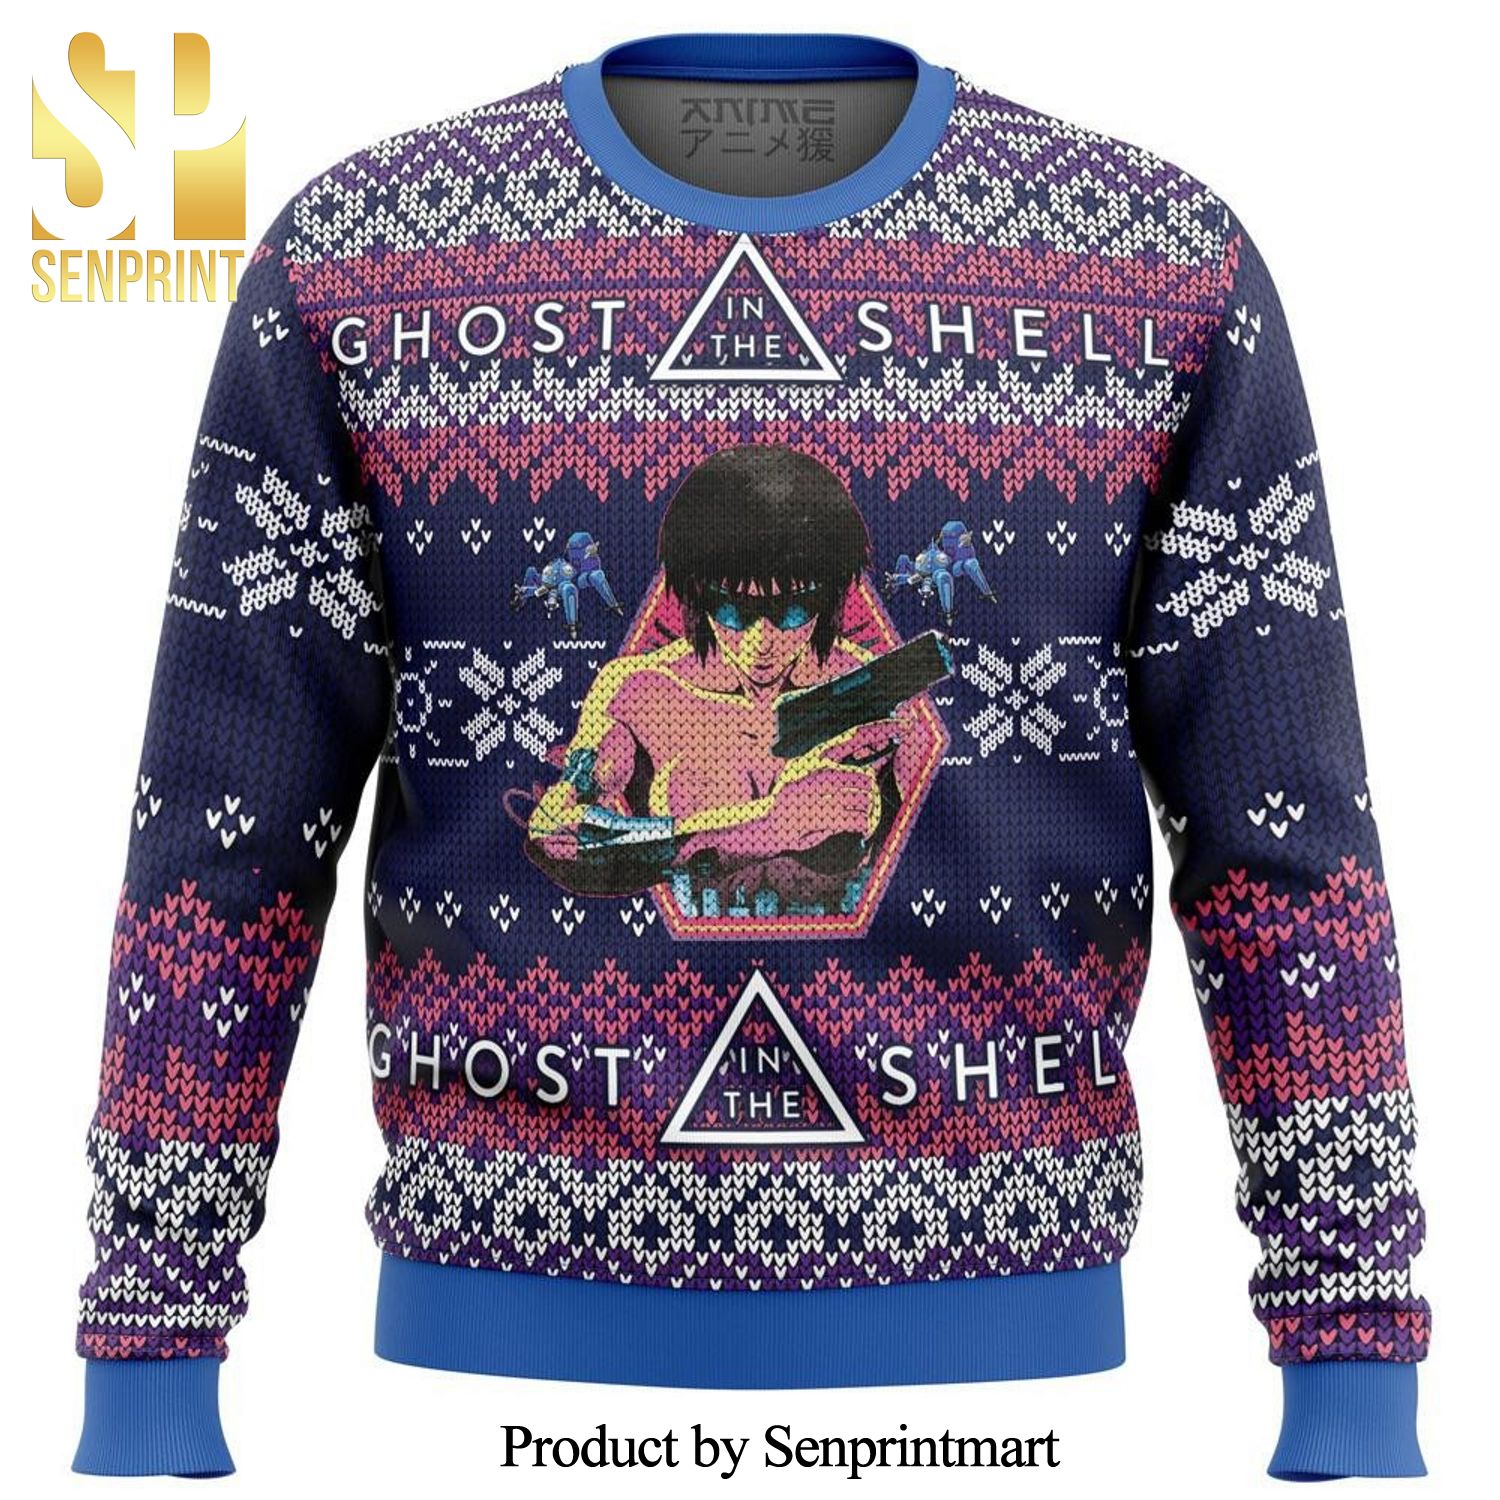 Ghost In The Shell Alt Premium Manga Anime Knitted Ugly Christmas Sweater